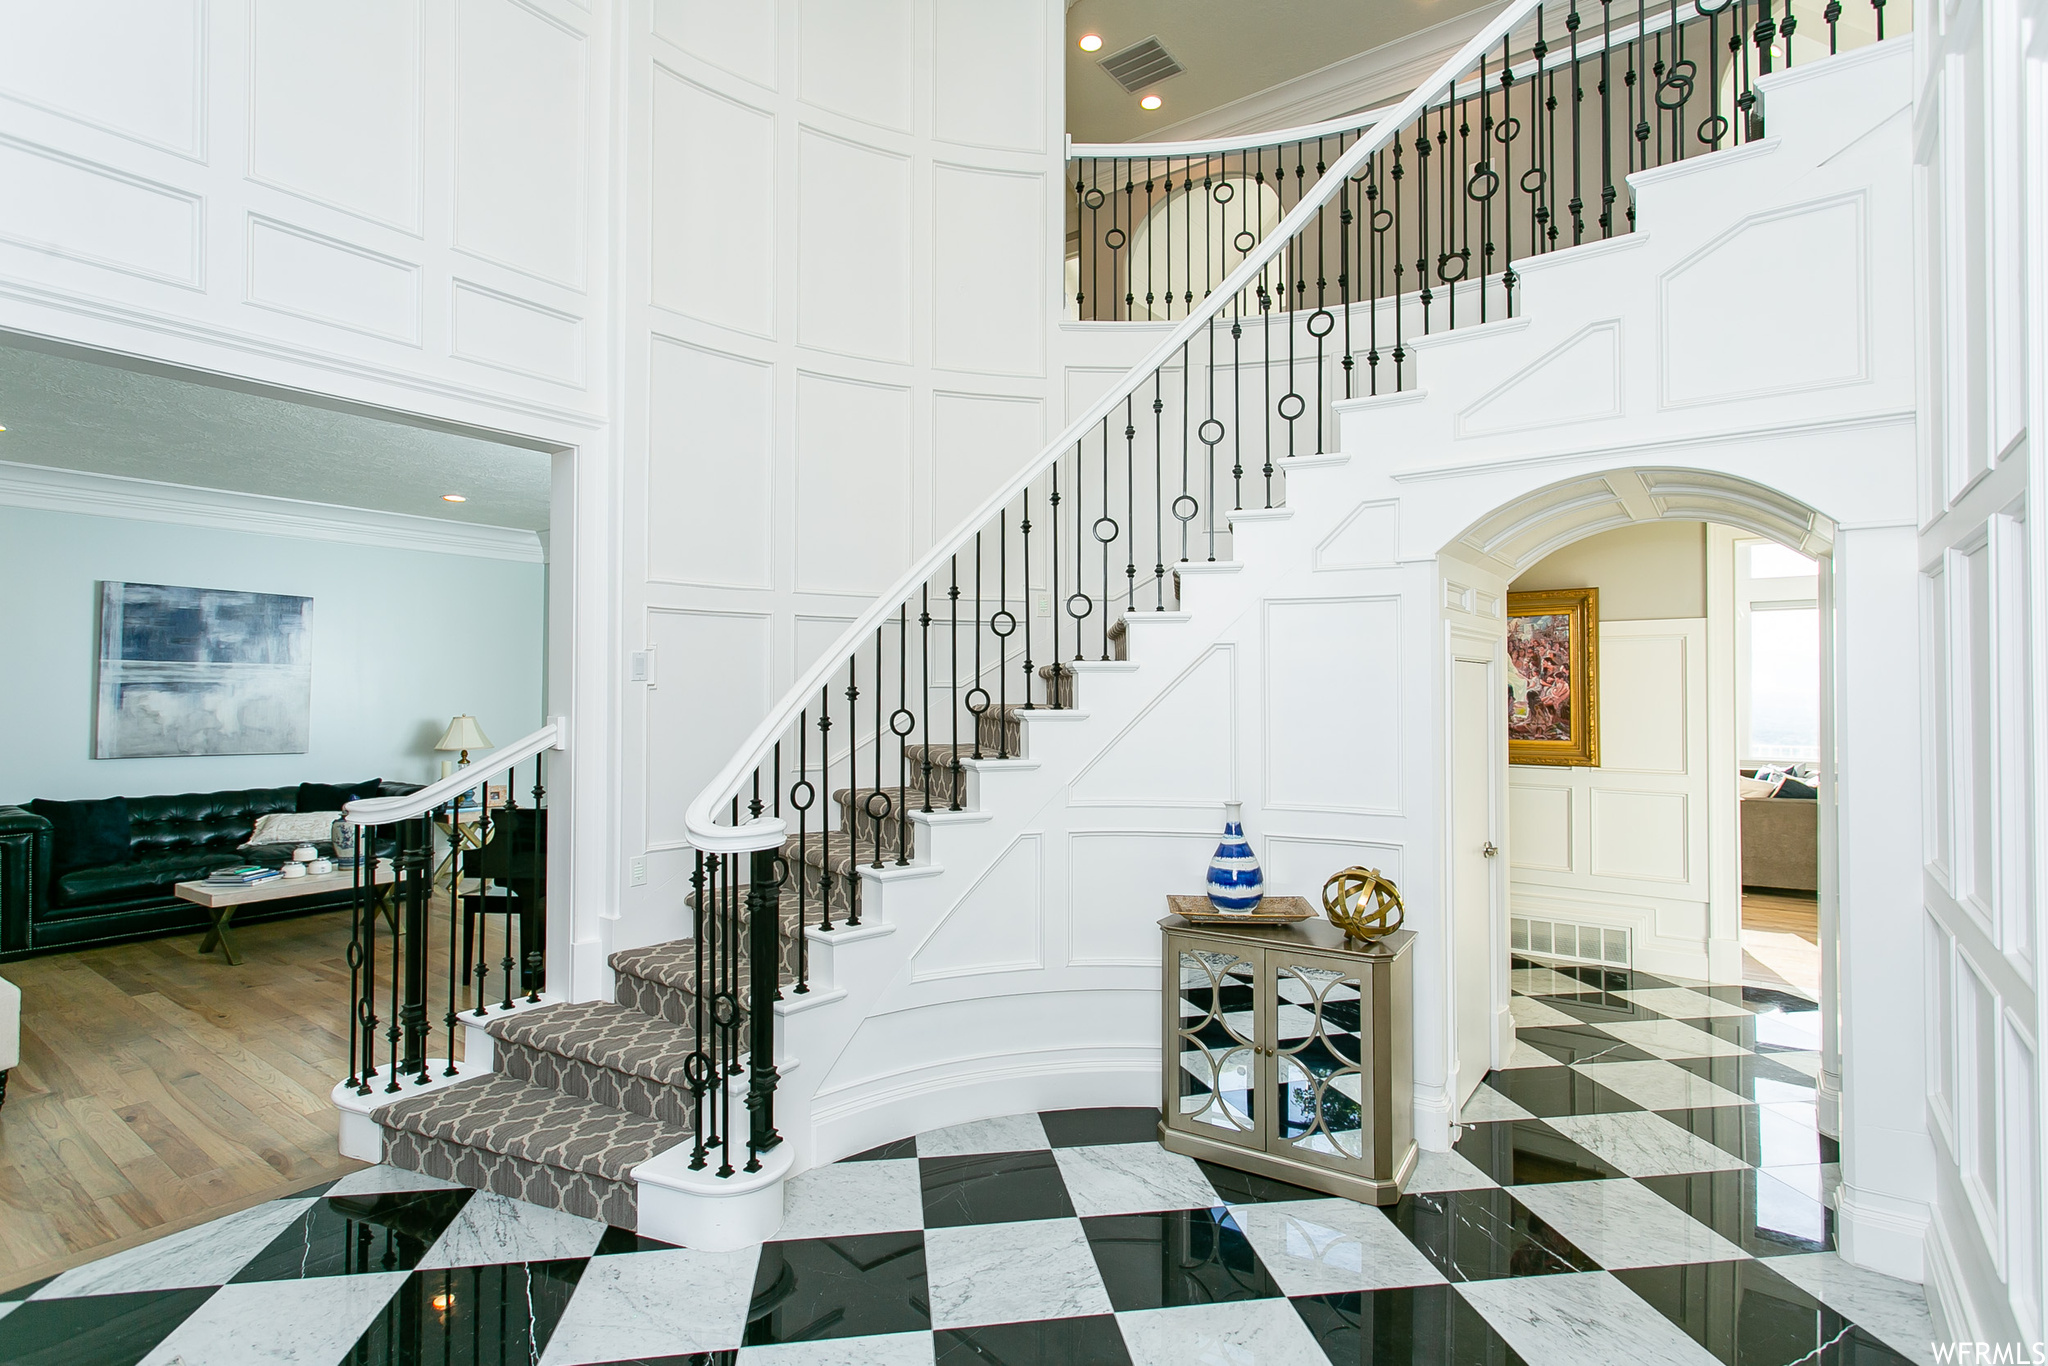 Immaculate foyer with a wainscoting spiral staircase and exquisite marble floors.